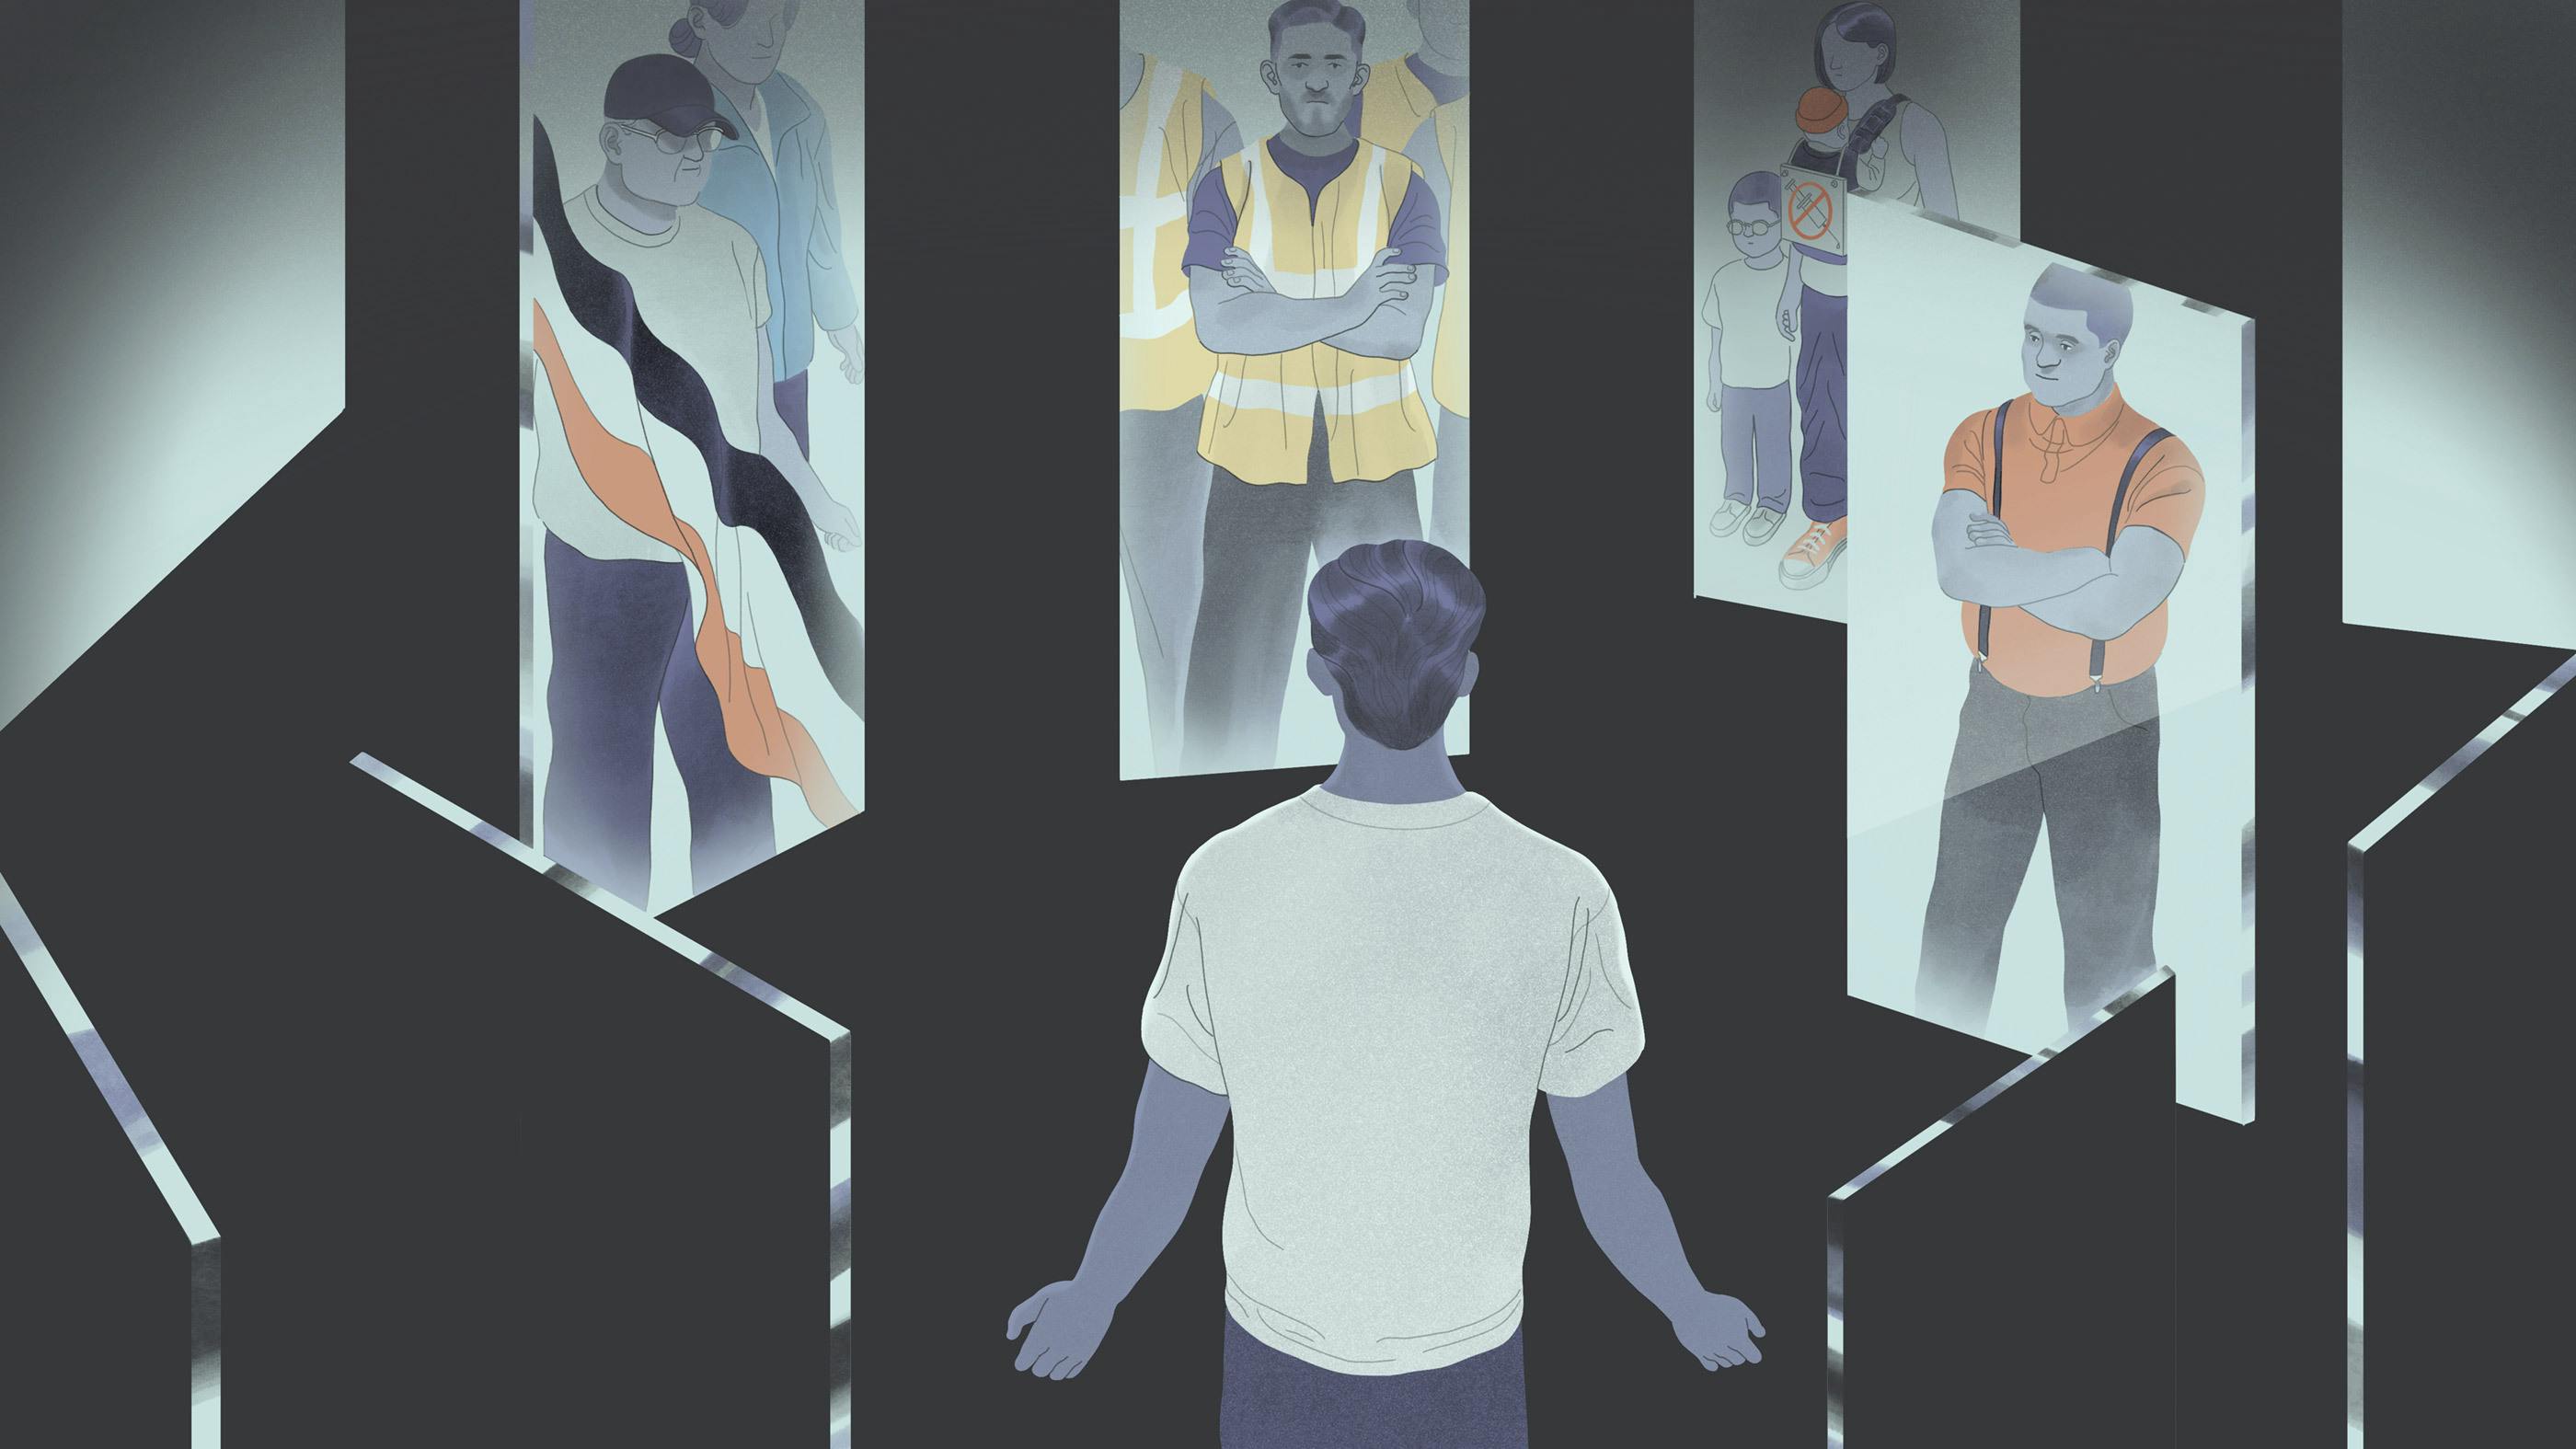 Man looking at mirrors with reflections of other people. Illustration by Jun Cen for part 4